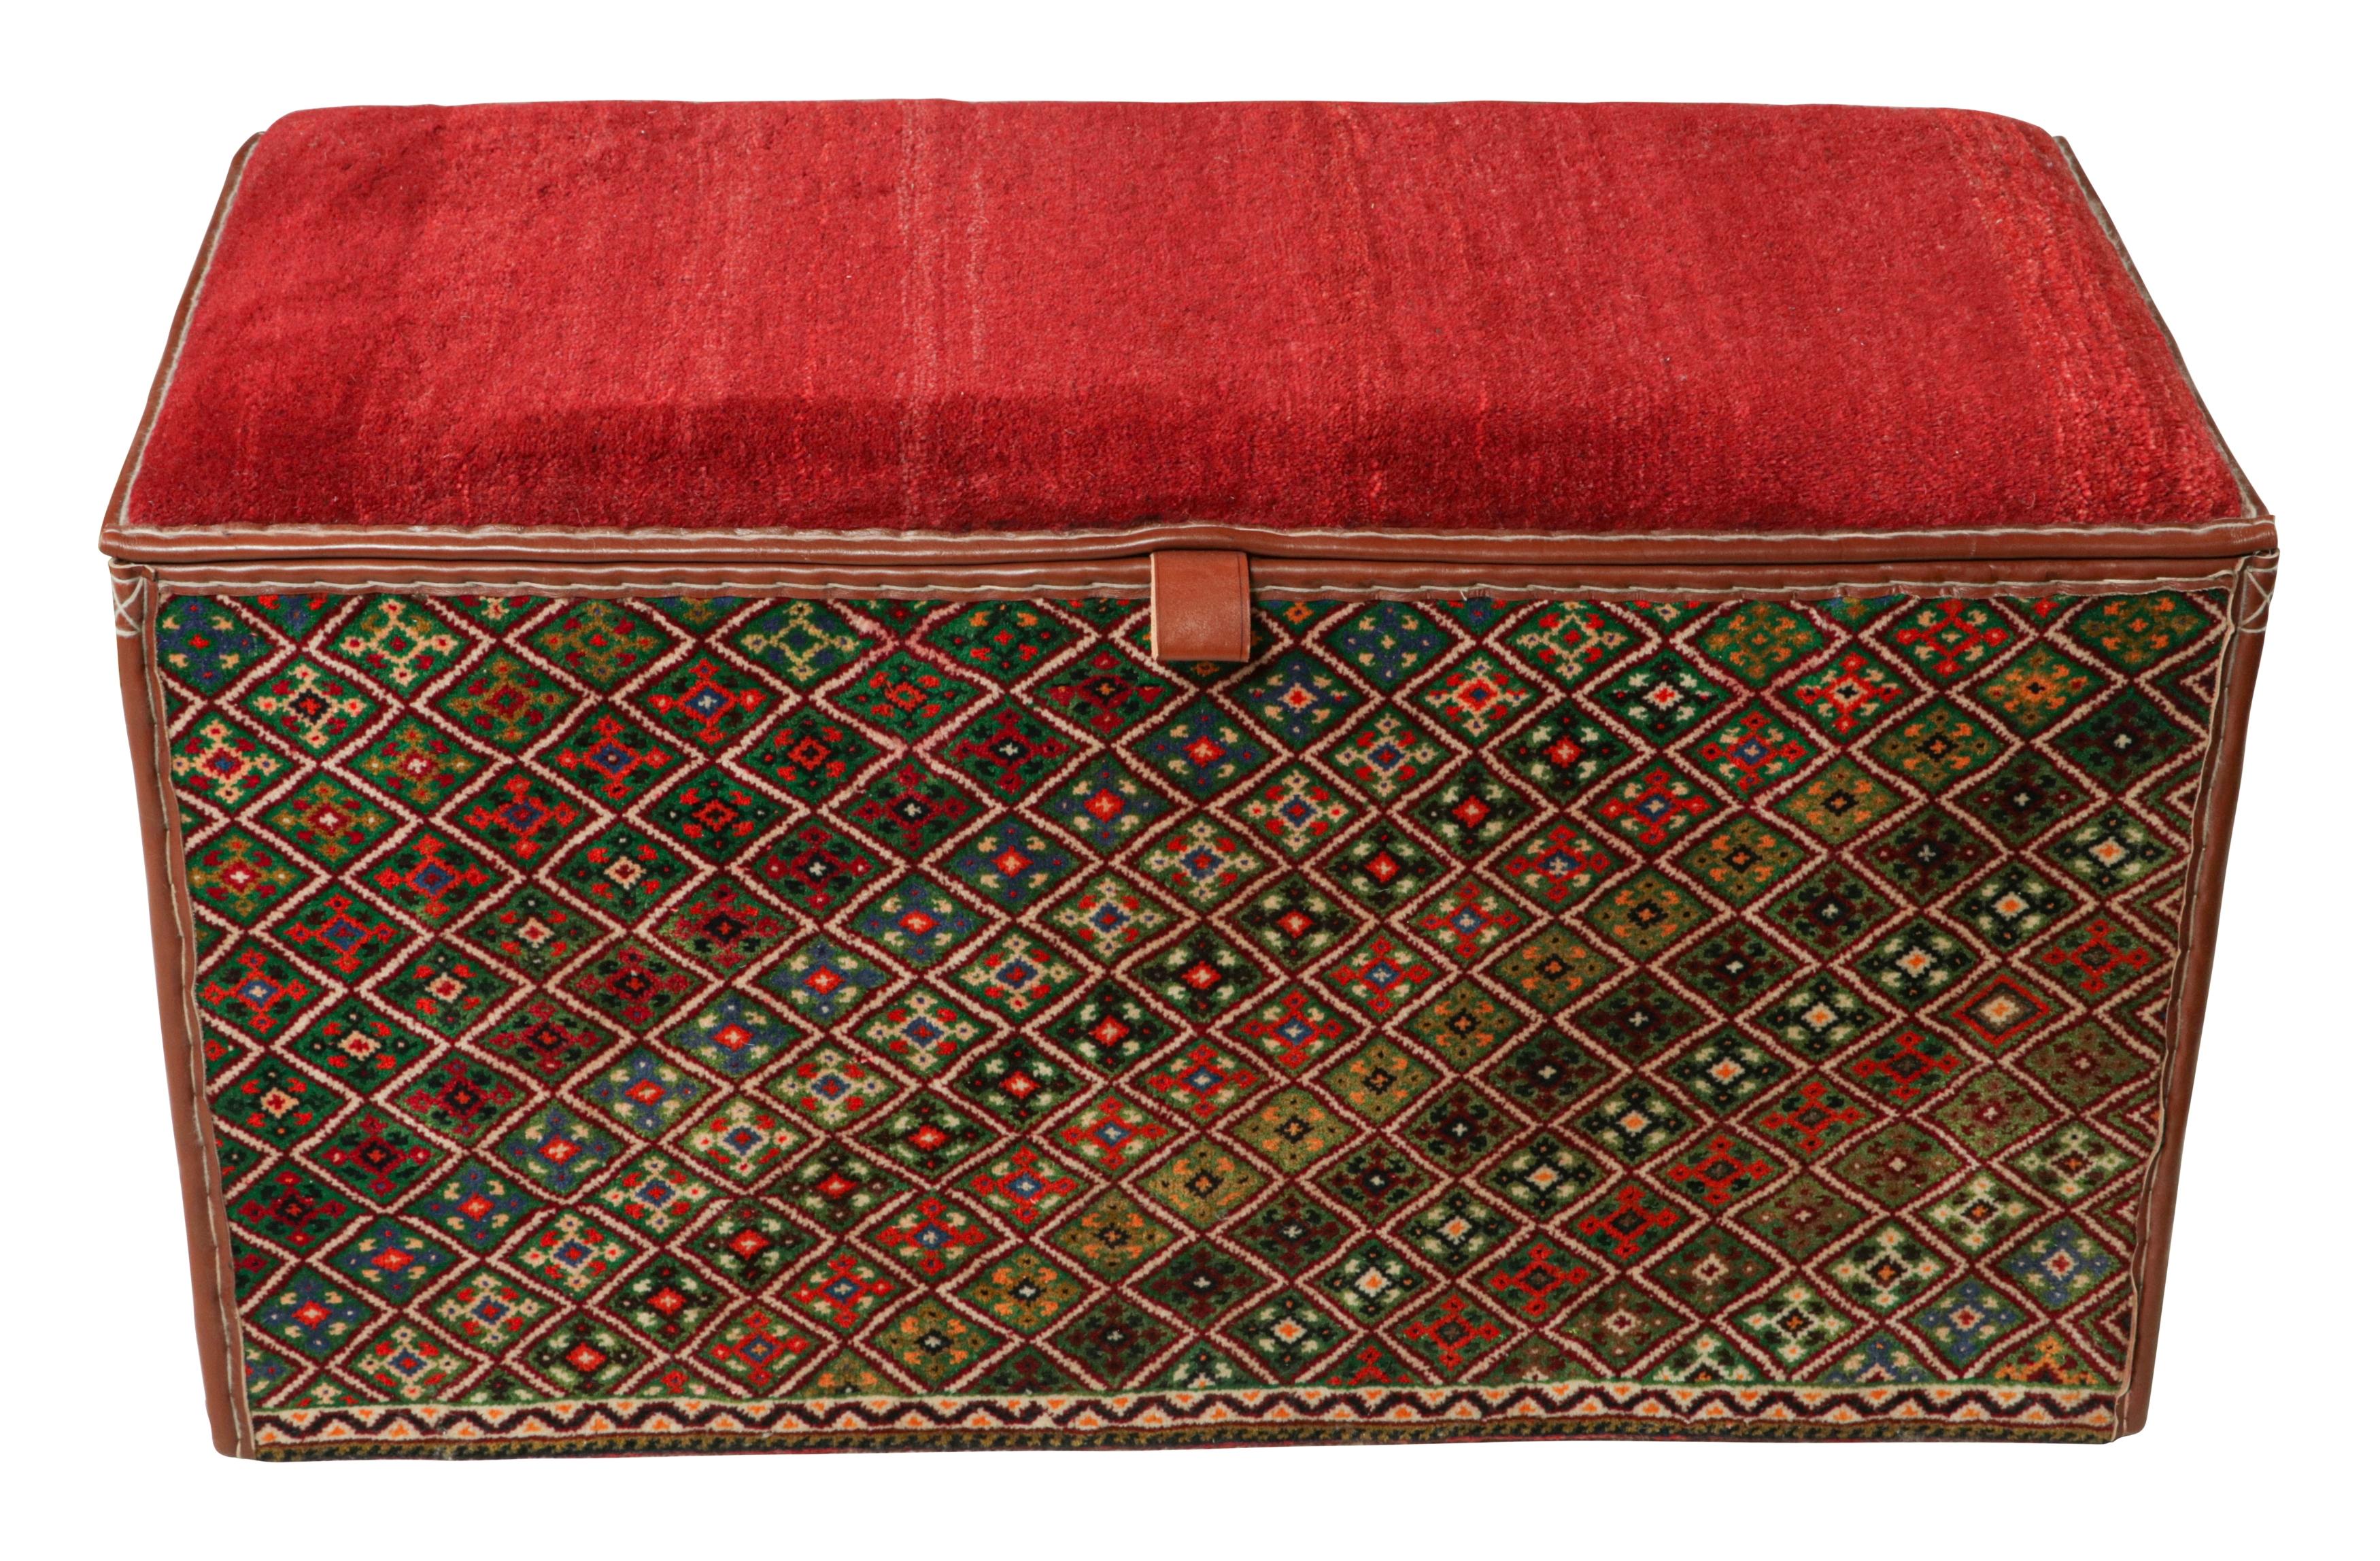 This storage chest is a collectible item in a rare new series from Rug & Kilim’s Modern Classics. 

Further on the Design:

Keen eyes will note that all four sides employ recycled vintage Persian tribal rugs in hand-knotted wool. The base is wood,